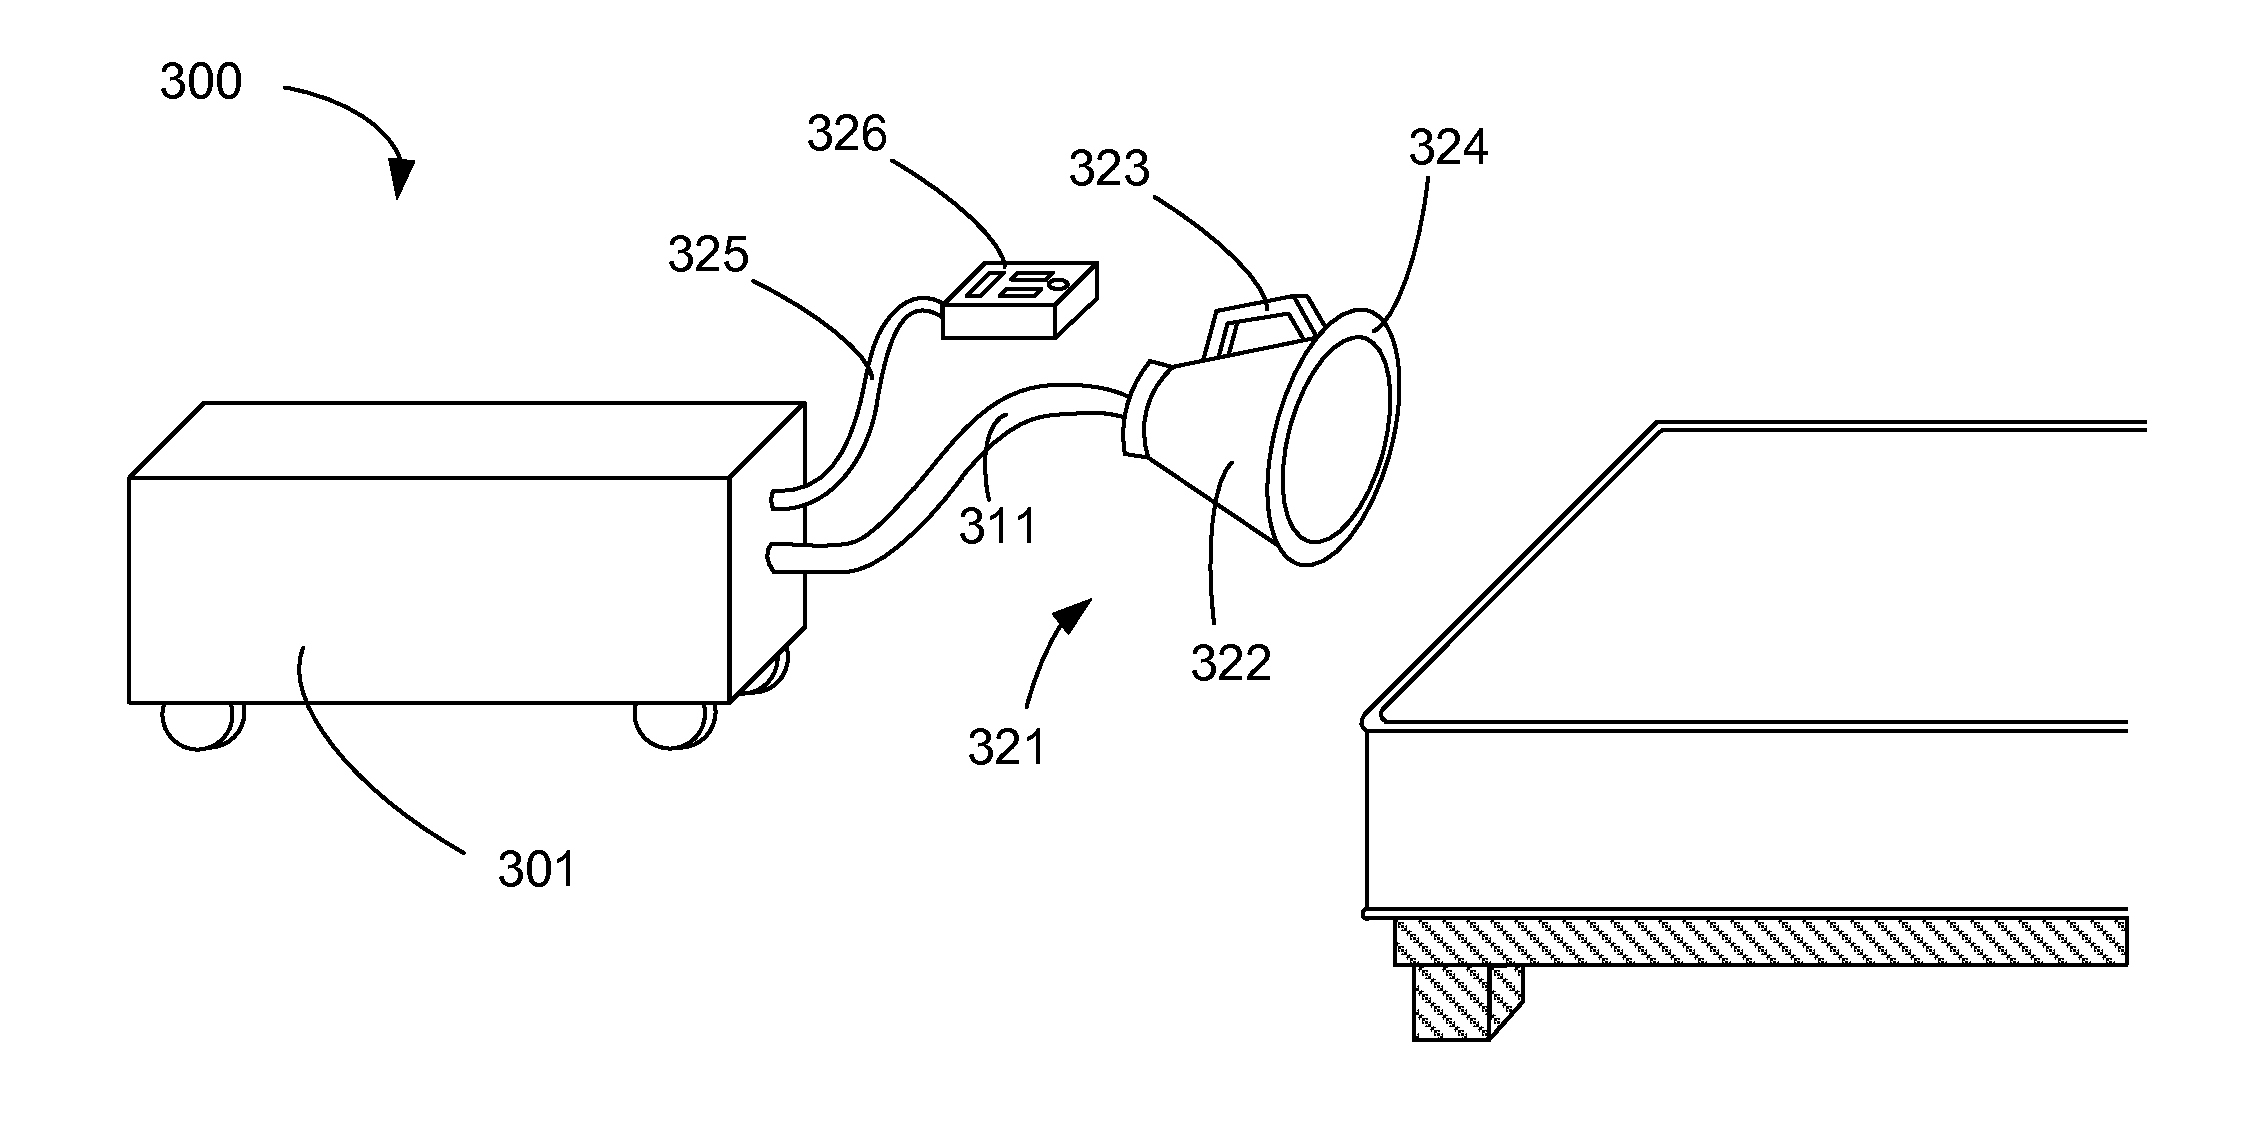 Apparatus for using microwave energy for insect and pest control and methods thereof